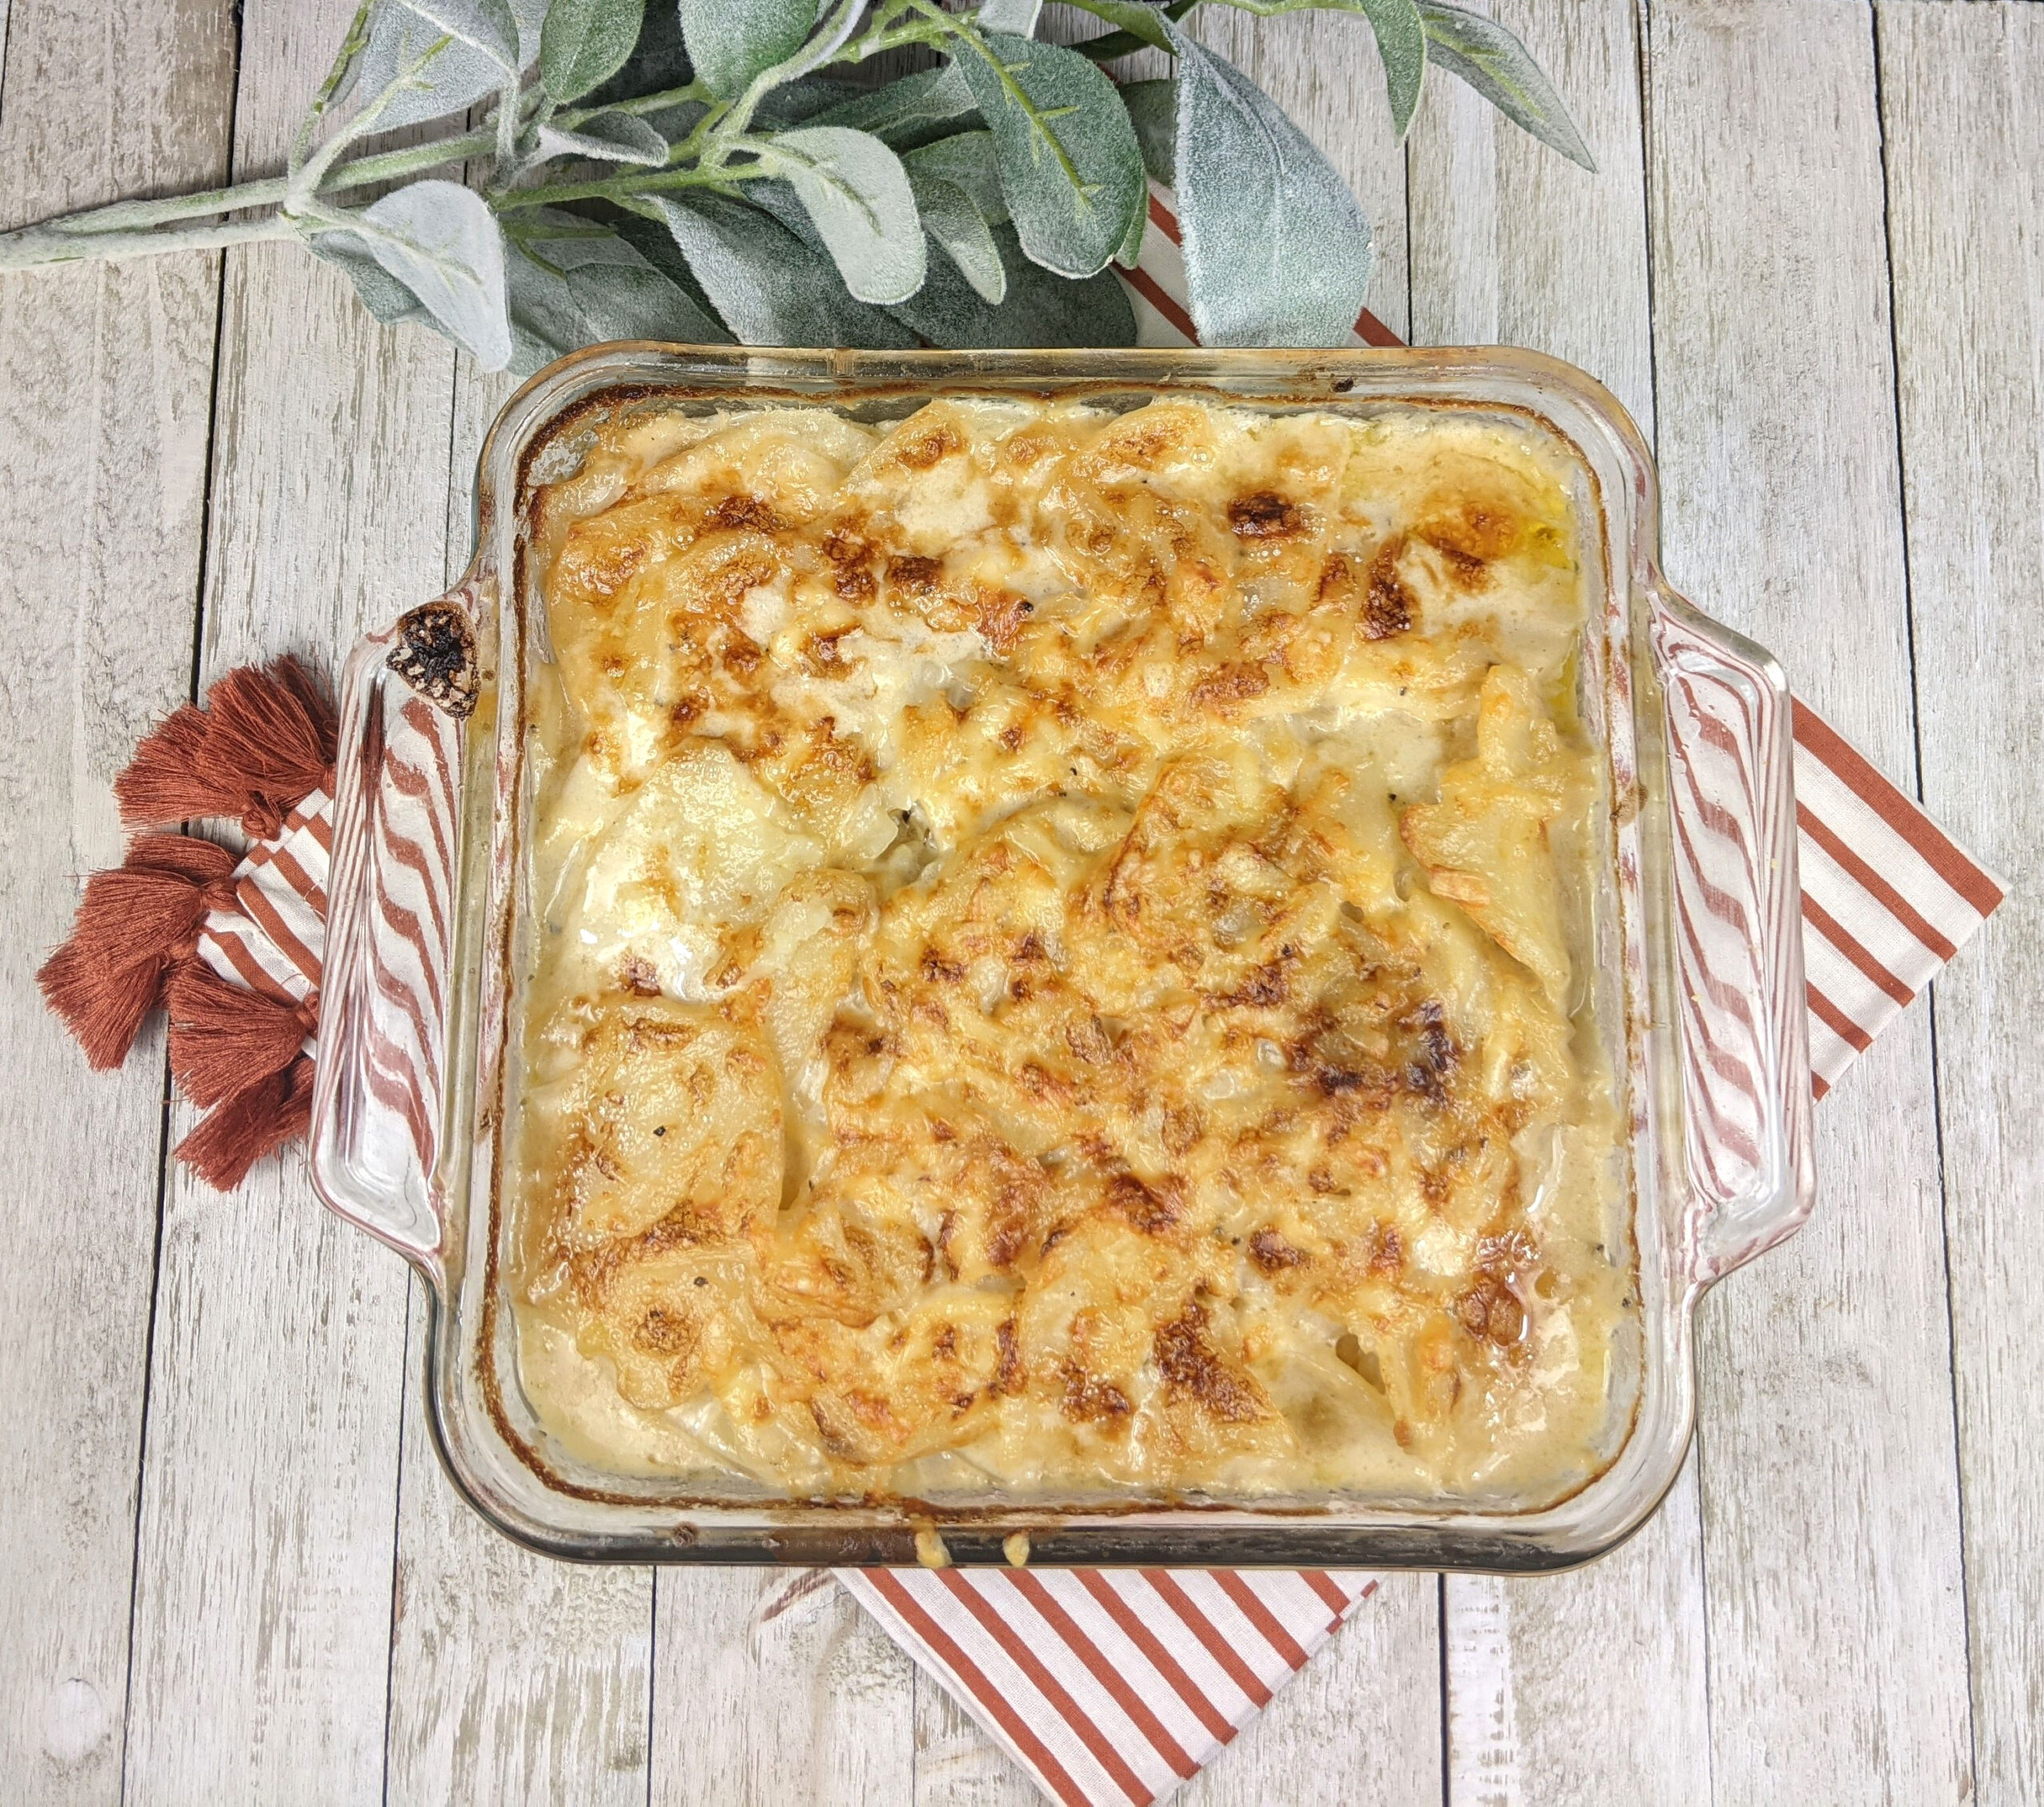 https://afoodieaffair.com/wp-content/uploads/2022/01/scalloped-potatoes-4-scaled.jpg